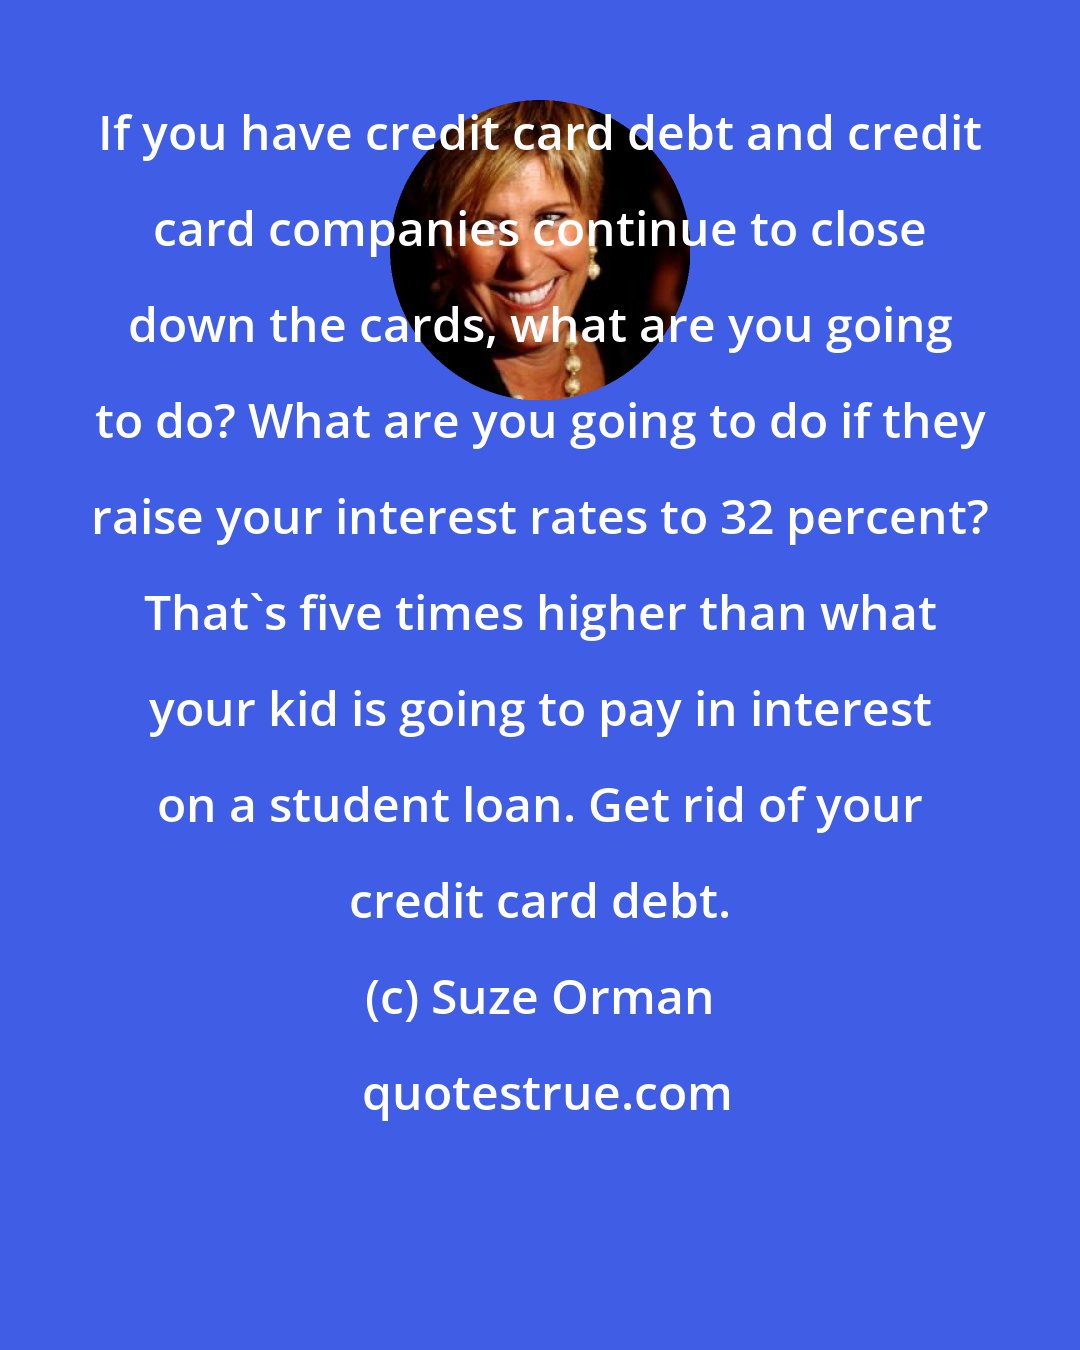 Suze Orman: If you have credit card debt and credit card companies continue to close down the cards, what are you going to do? What are you going to do if they raise your interest rates to 32 percent? That's five times higher than what your kid is going to pay in interest on a student loan. Get rid of your credit card debt.